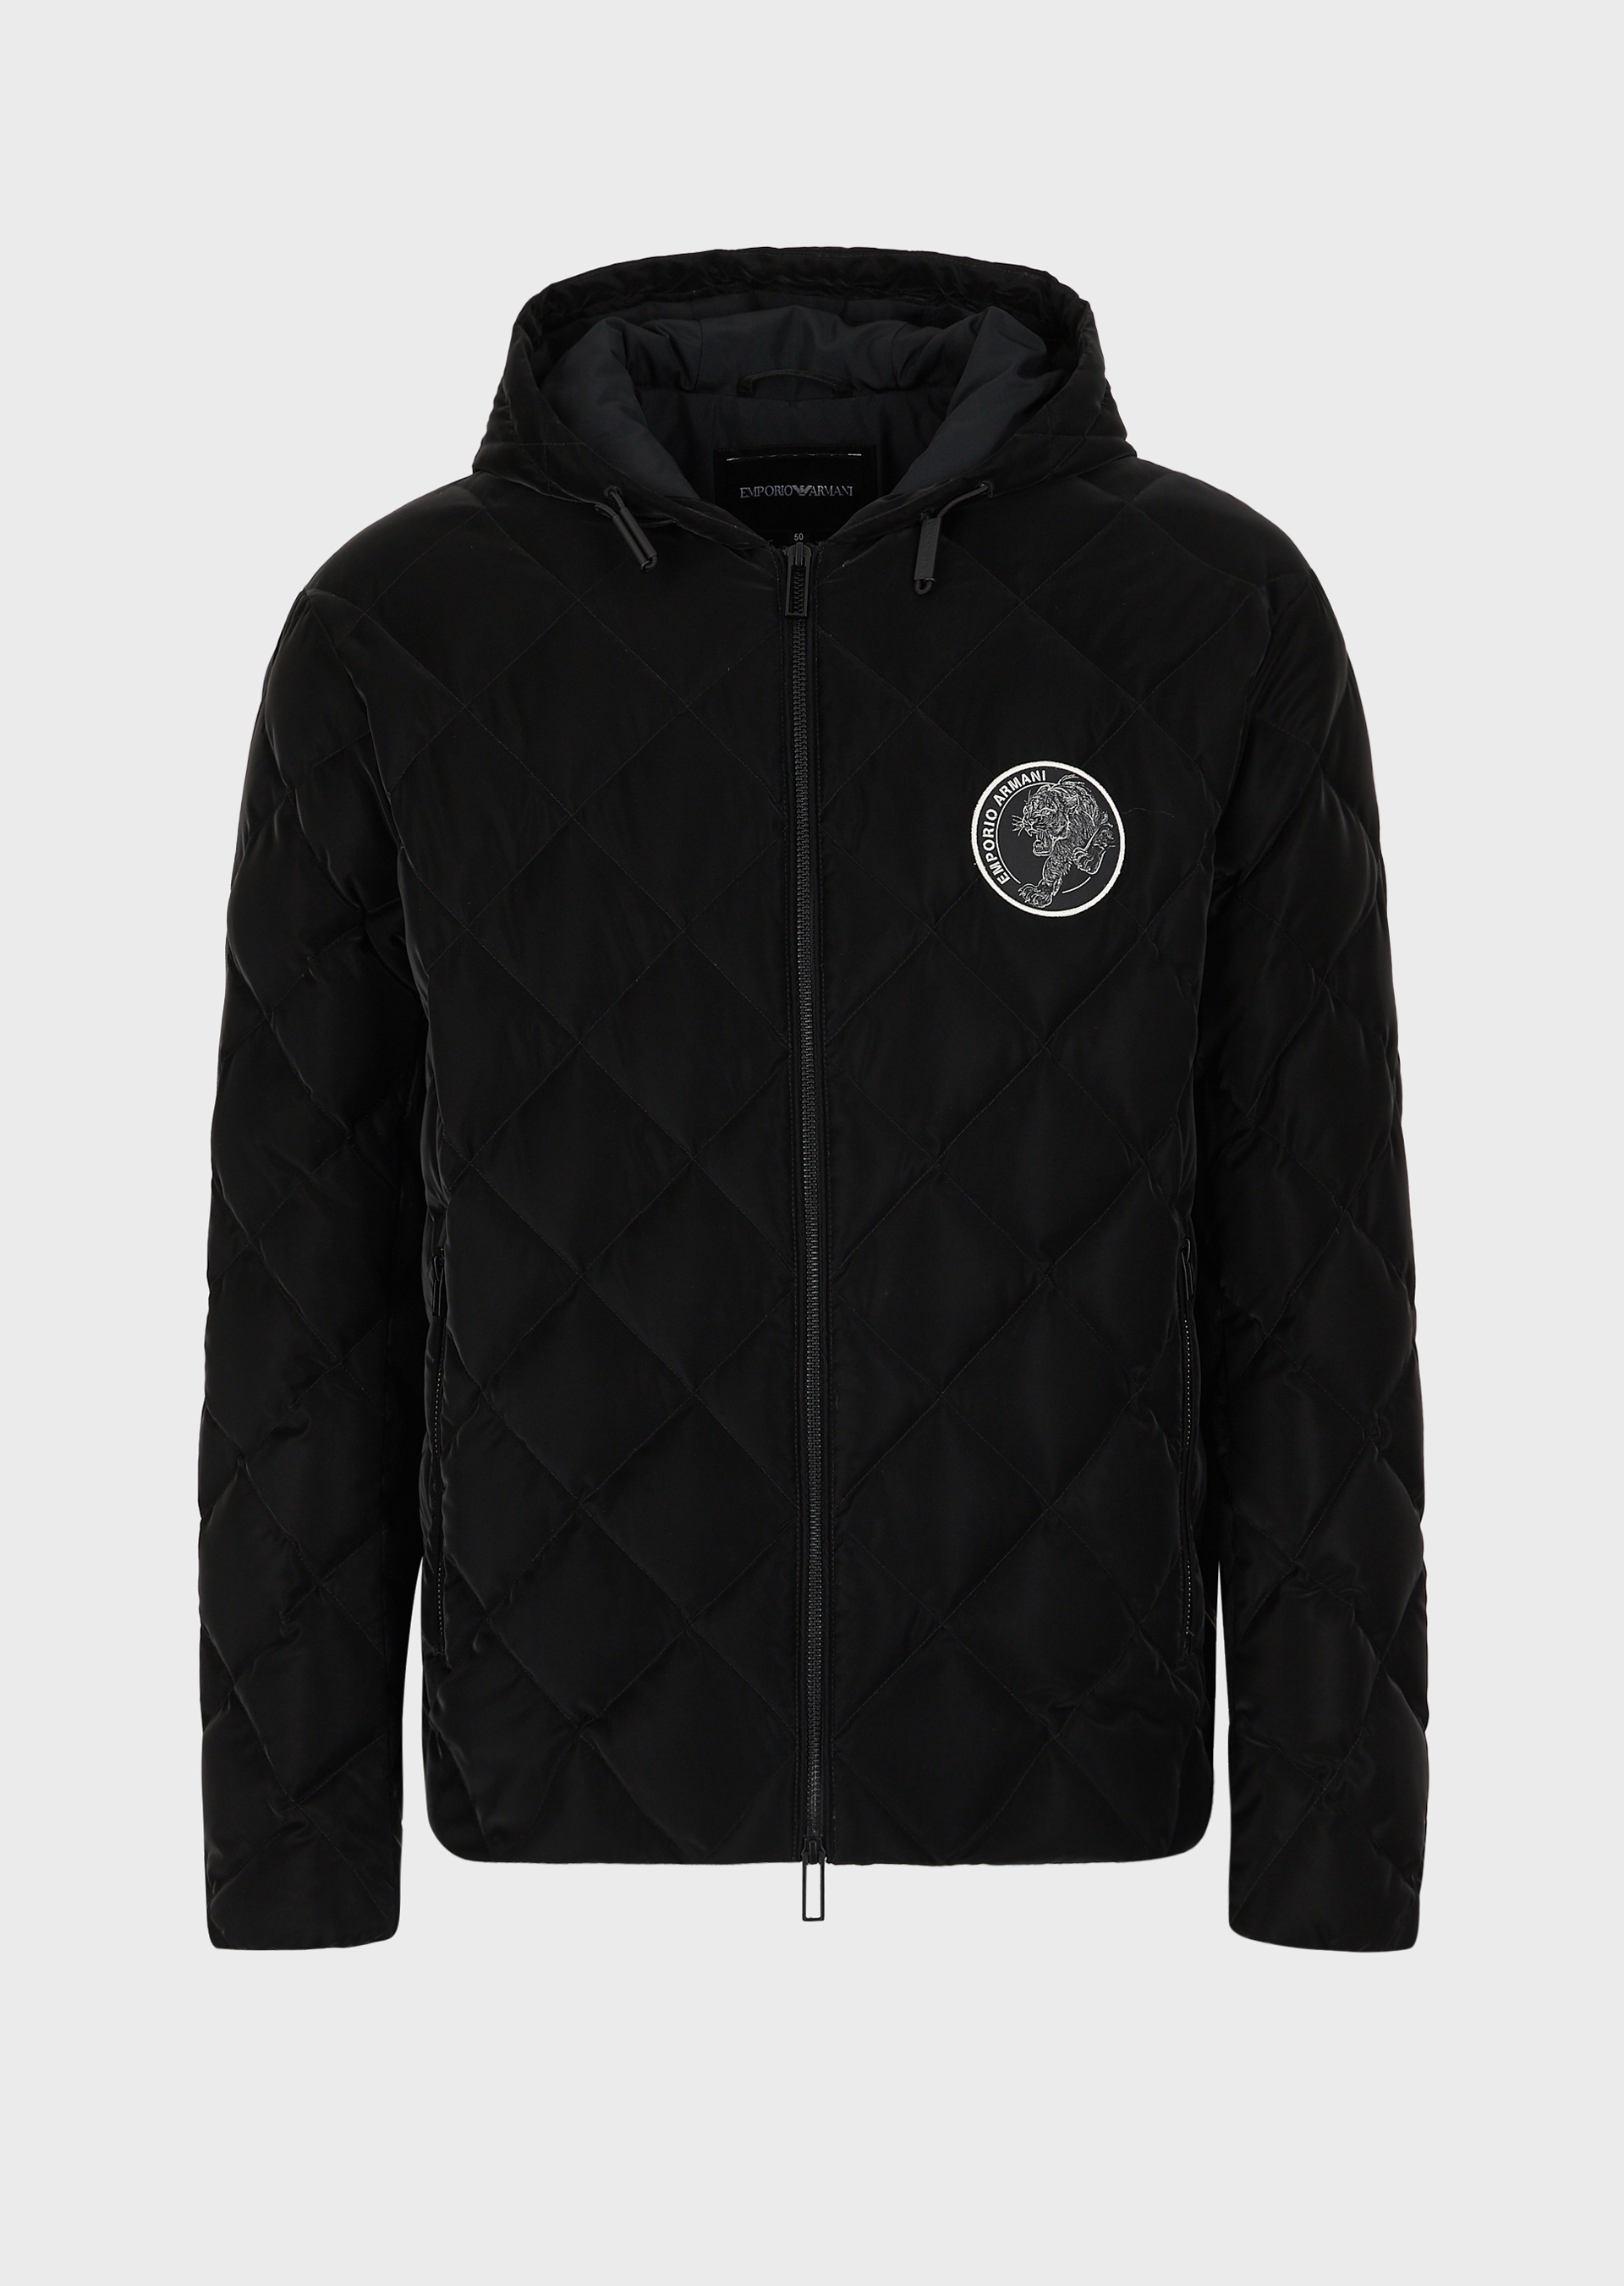 Emporio Armani Chinese New Year Capsule down jacket